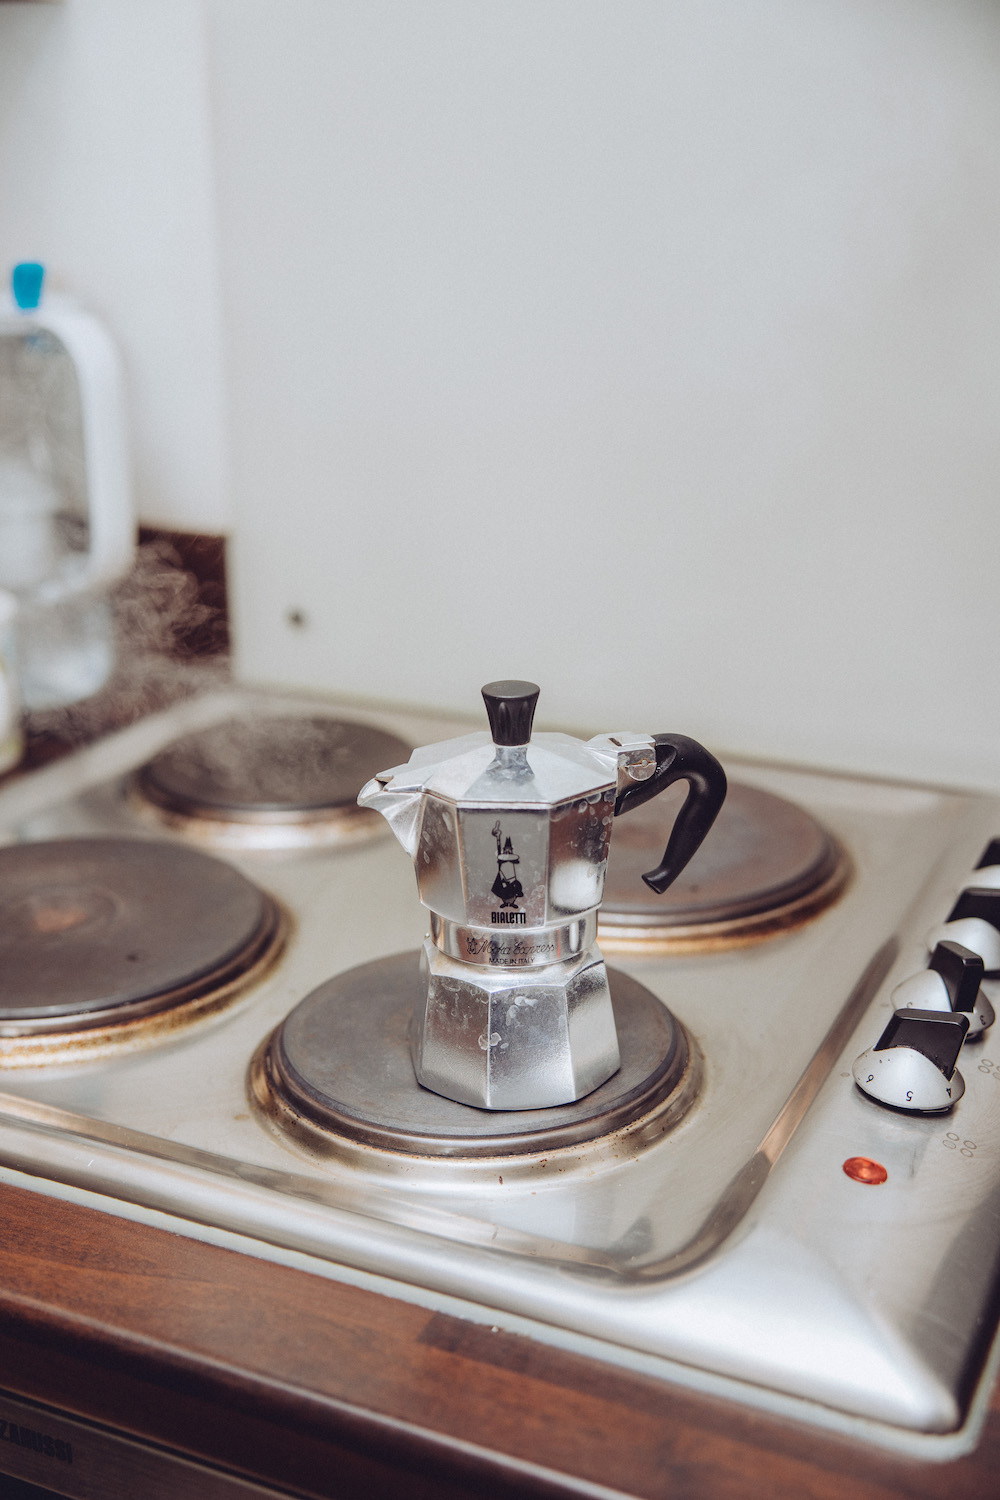 https://www.keepitsimpelle.com/wp-content/uploads/2022/01/bialetti-on-stove-How-To-Make-The-Perfect-Oat-Milk-Latte-At-Home.jpg